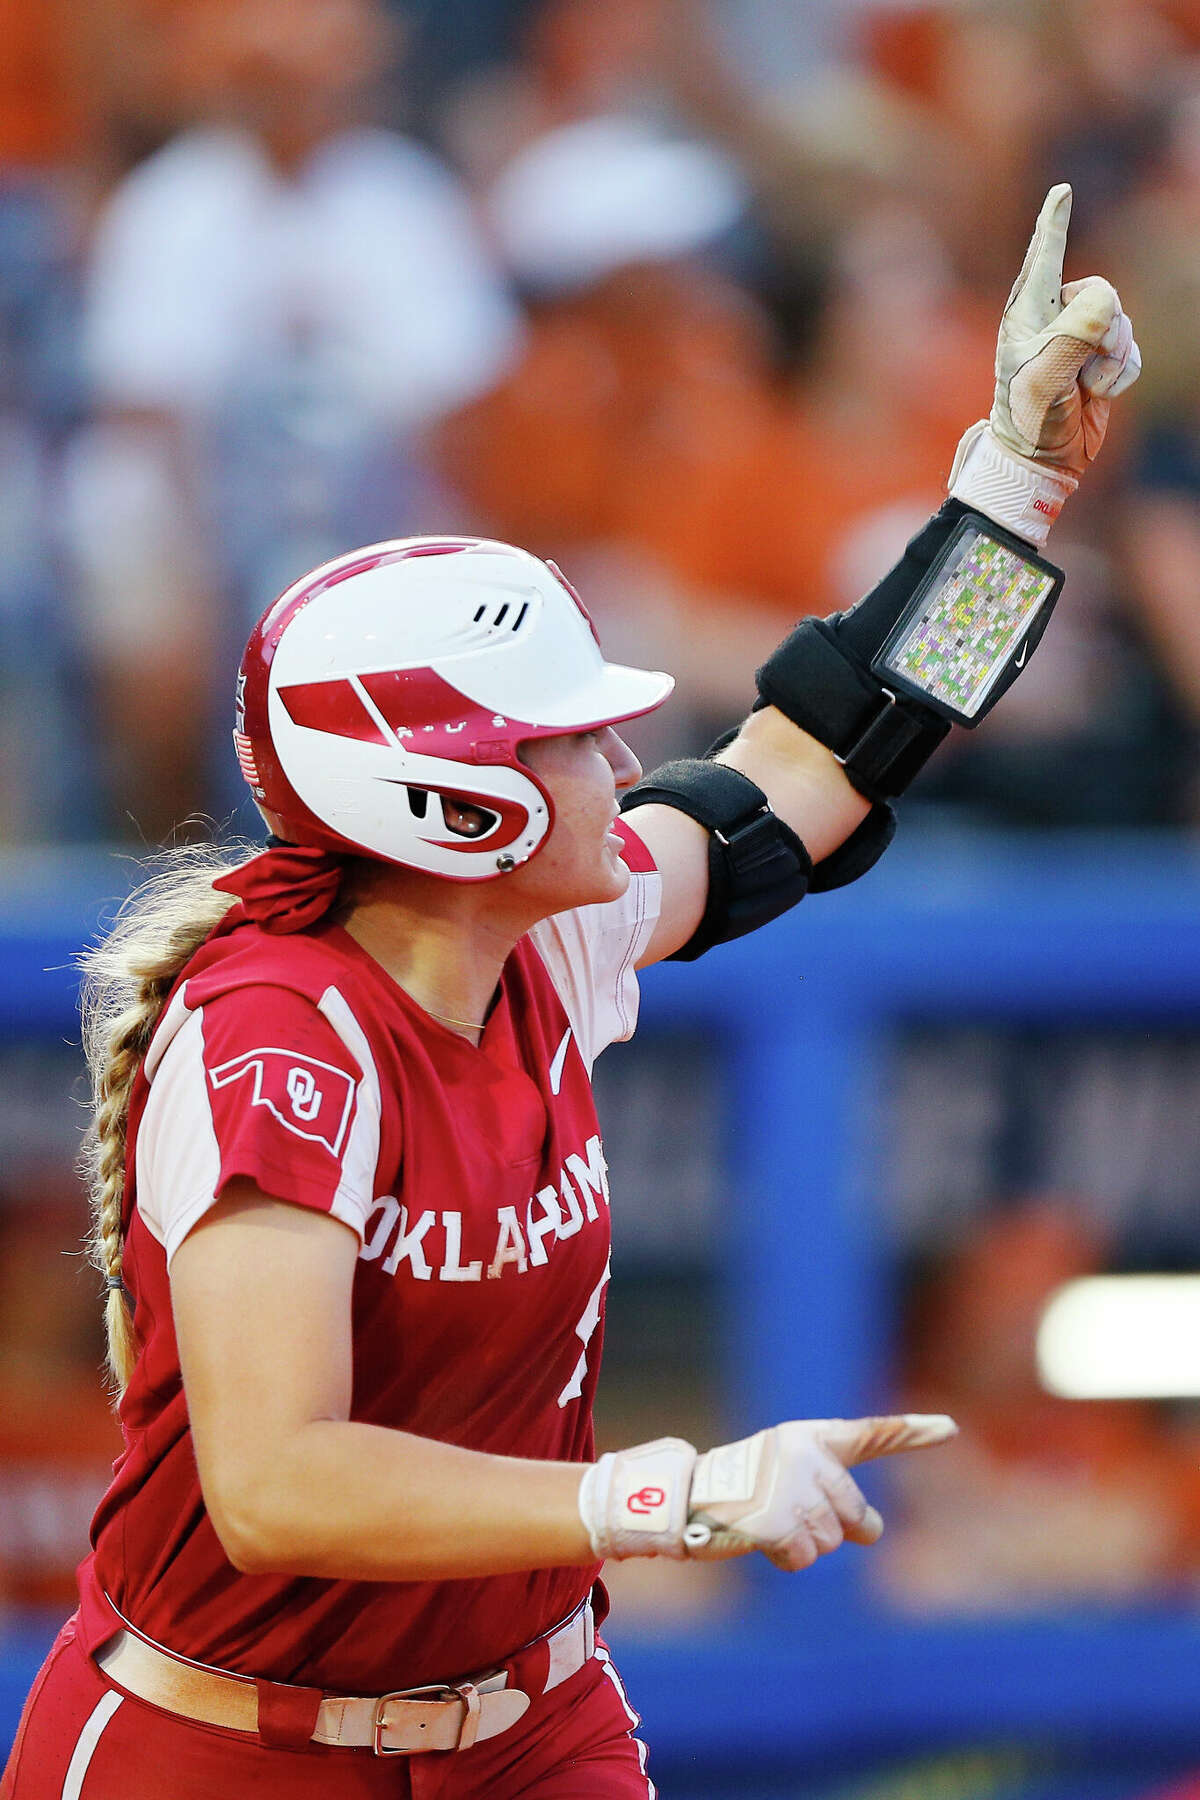 OKLAHOMA CITY, OK - JUNE 9: Kinzie Hansen #9 of the Oklahoma Sooners celebrates as she watches her three-run home run clear the wall against the Texas Longhorns in the fifth inning during the NCAA Women's College World Series finals at the USA Softball Hall of Fame Complex on June 9, 2022 in Oklahoma City, Oklahoma. Oklahoma leads 10-2 in the sixth inning. (Photo by Brian Bahr/Getty Images)